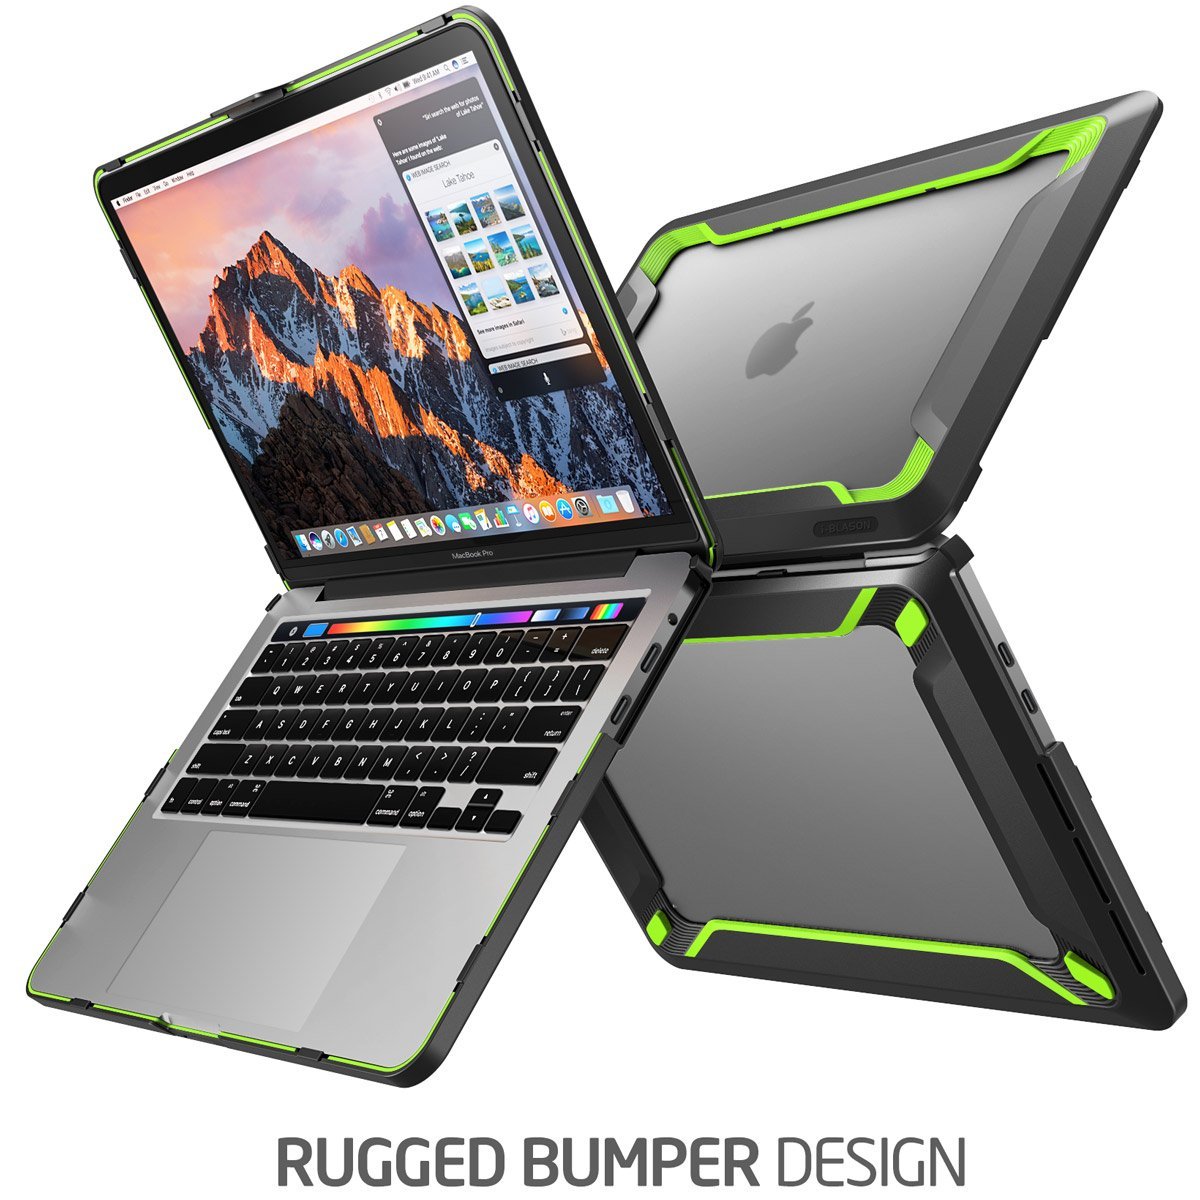 MBP1615RUGGED-GN